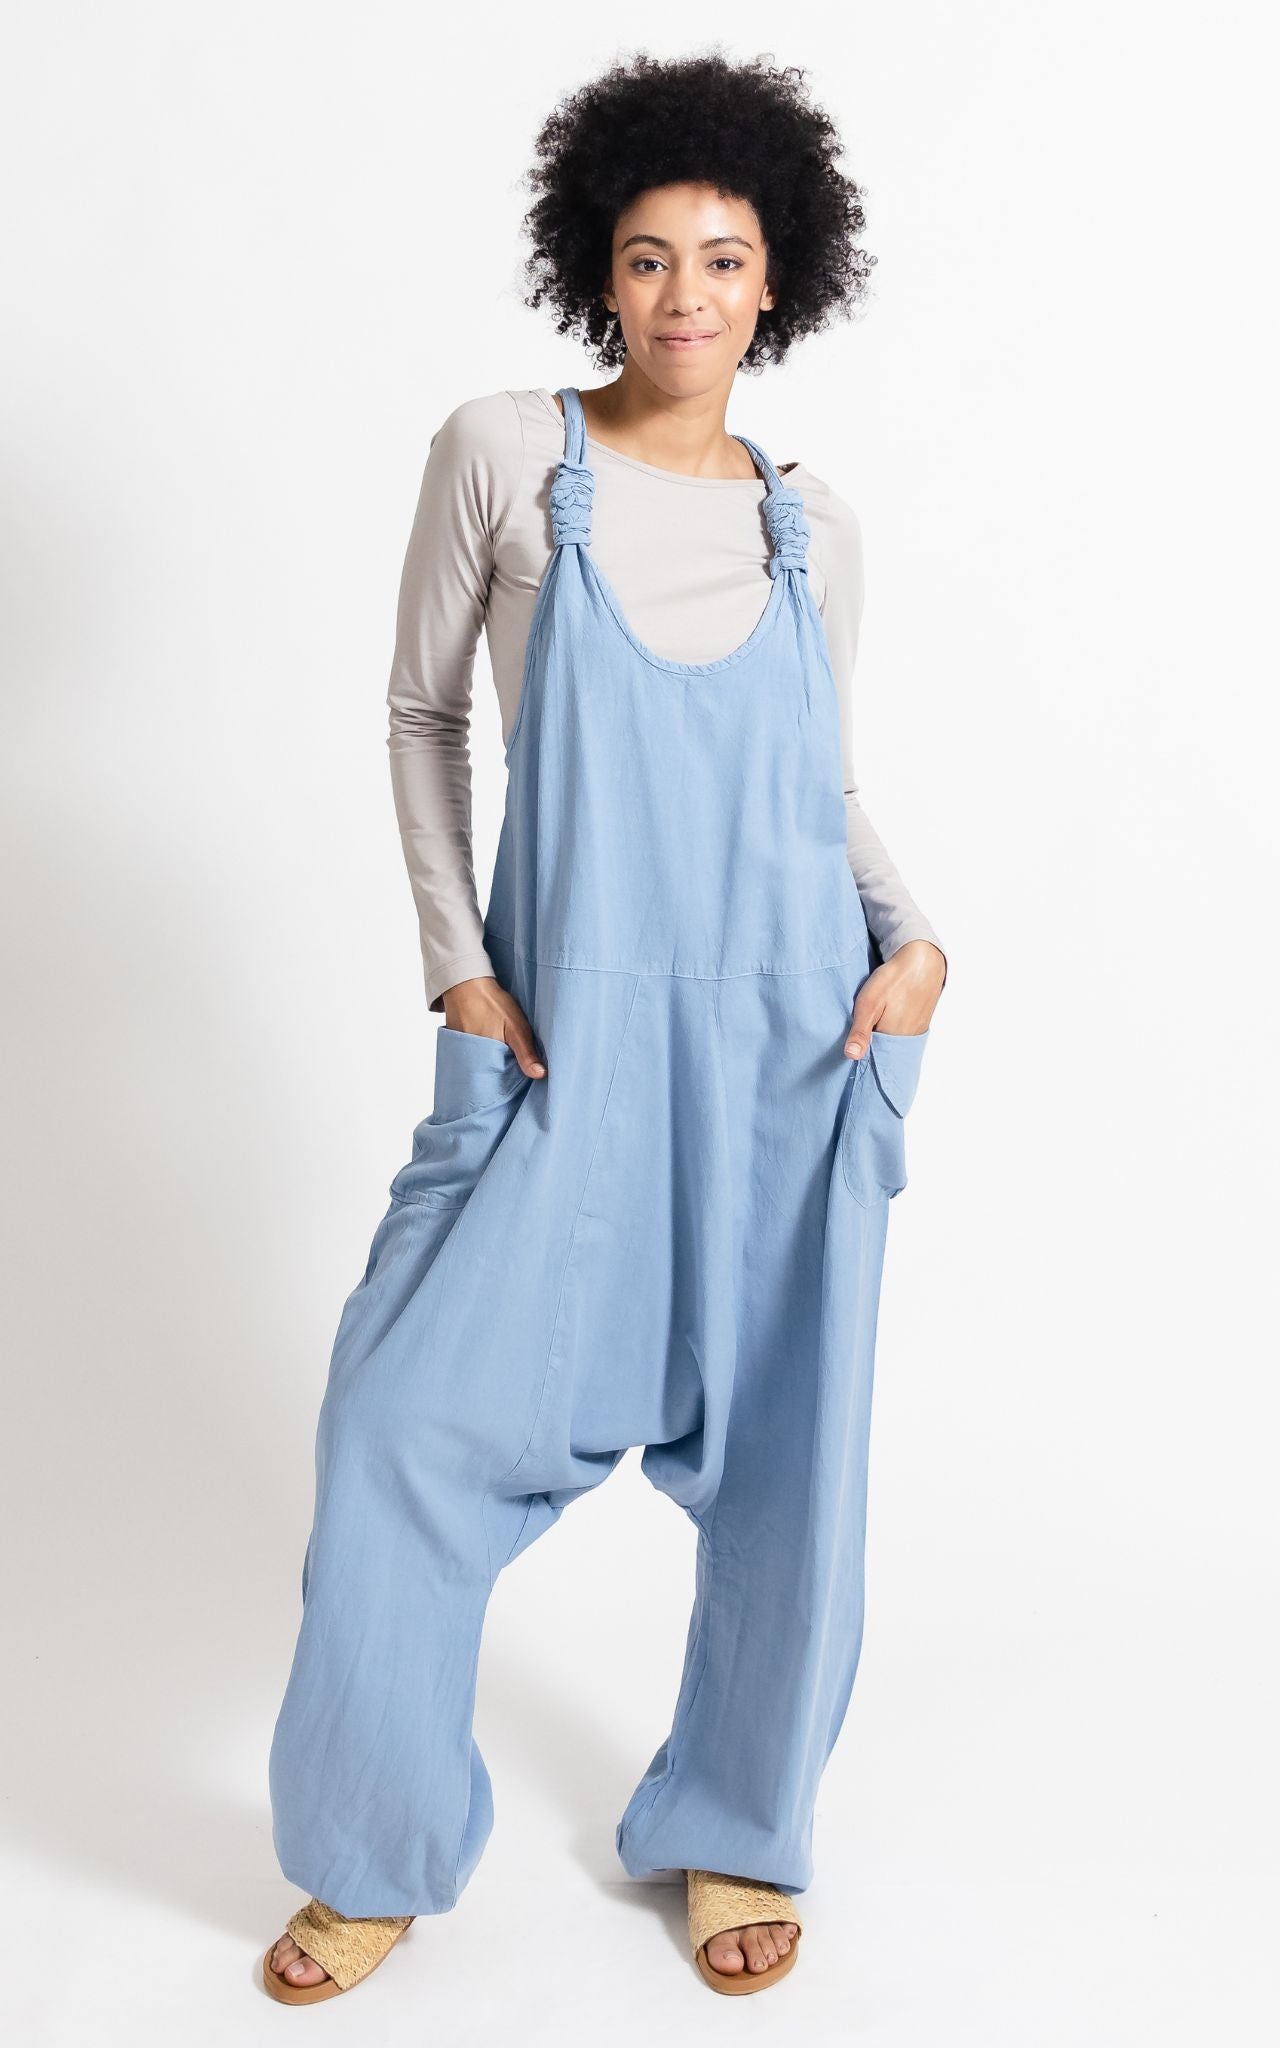 Surya Australia Ethical Cotton long 'Bahini' Overalls made in Nepal - Sky Blue